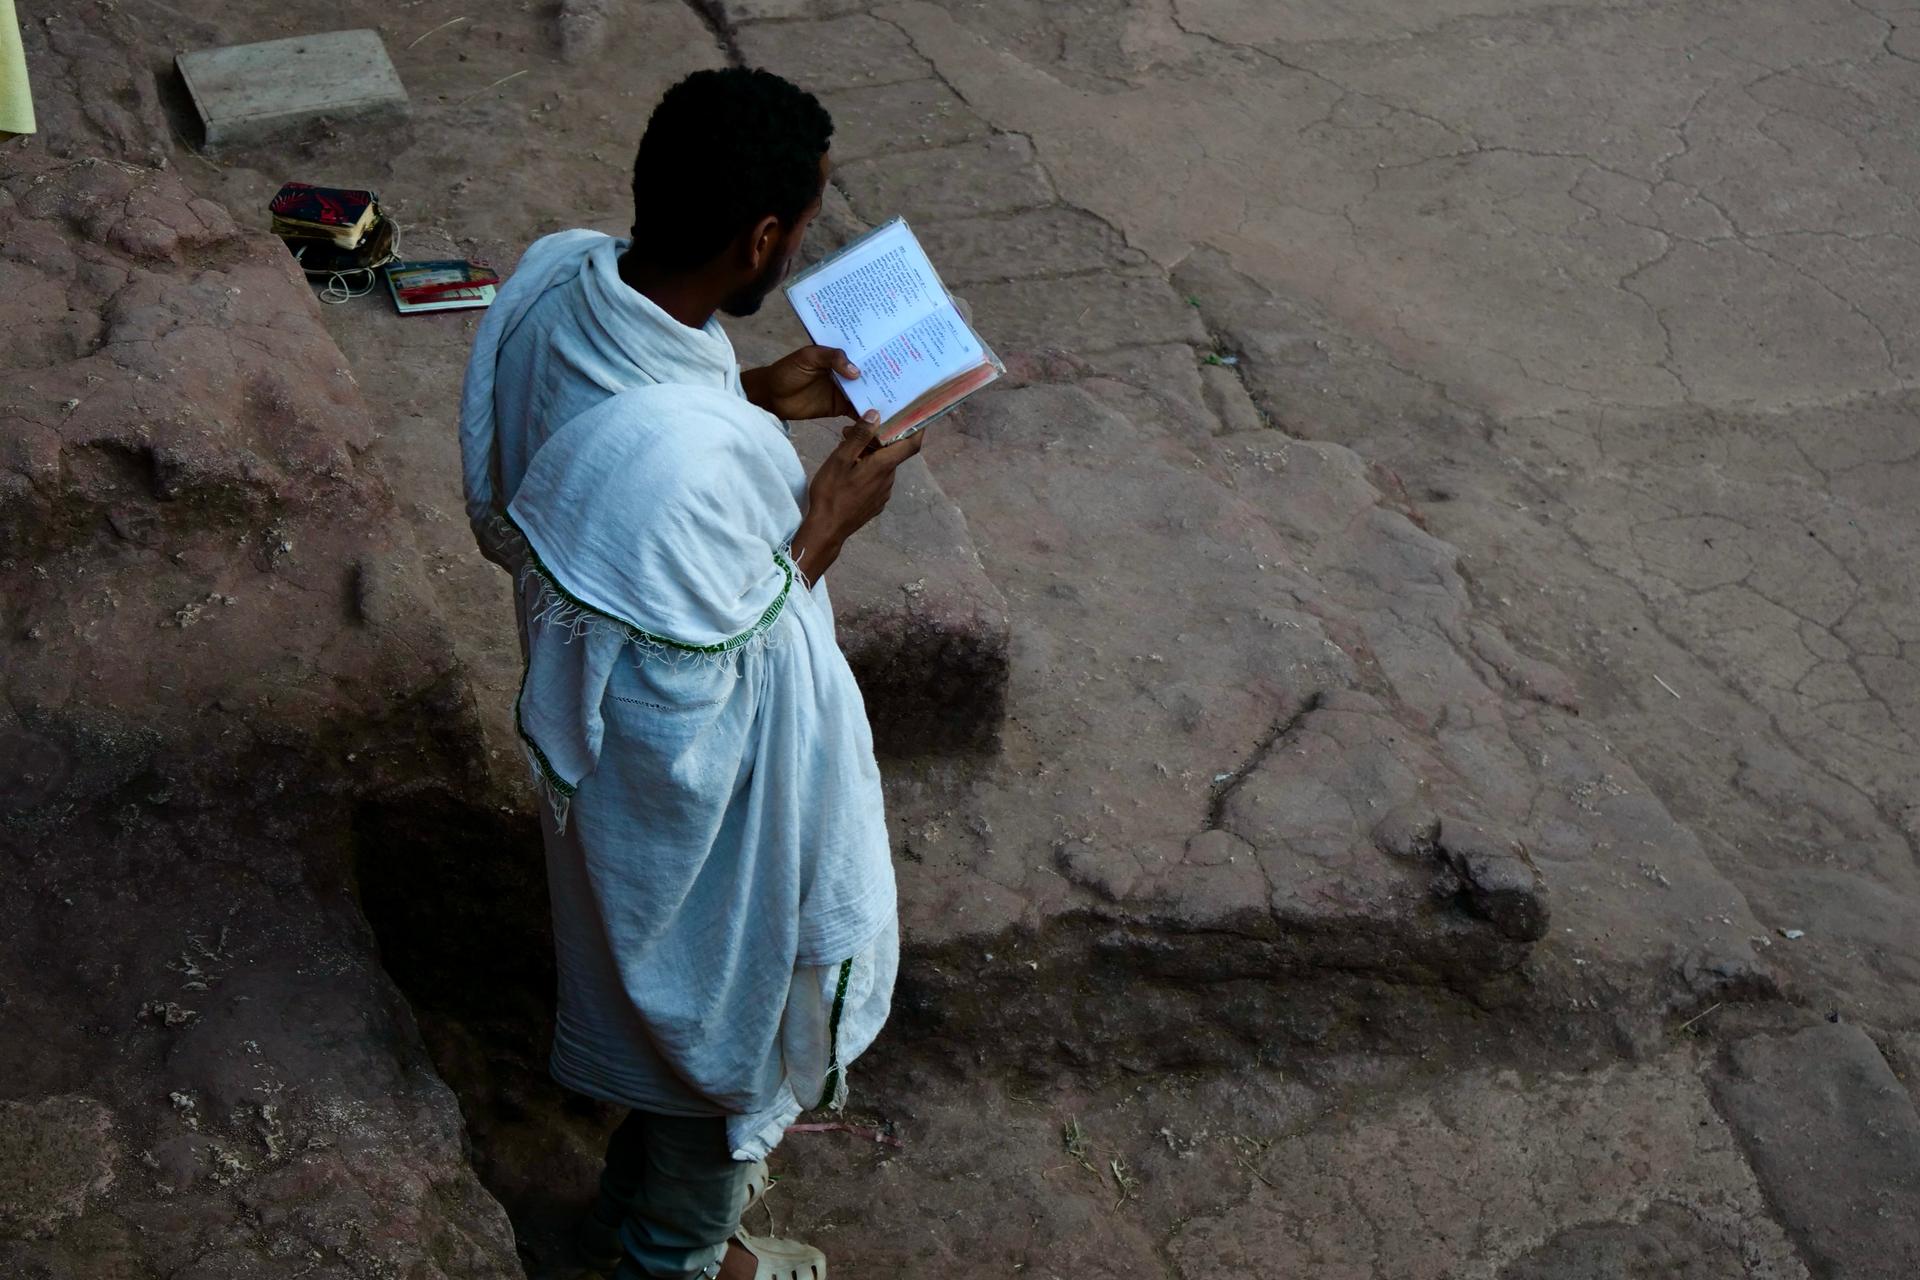 Young man prays at the Lalibela rock churches in Ethiopia, Feb. 16, 2022.